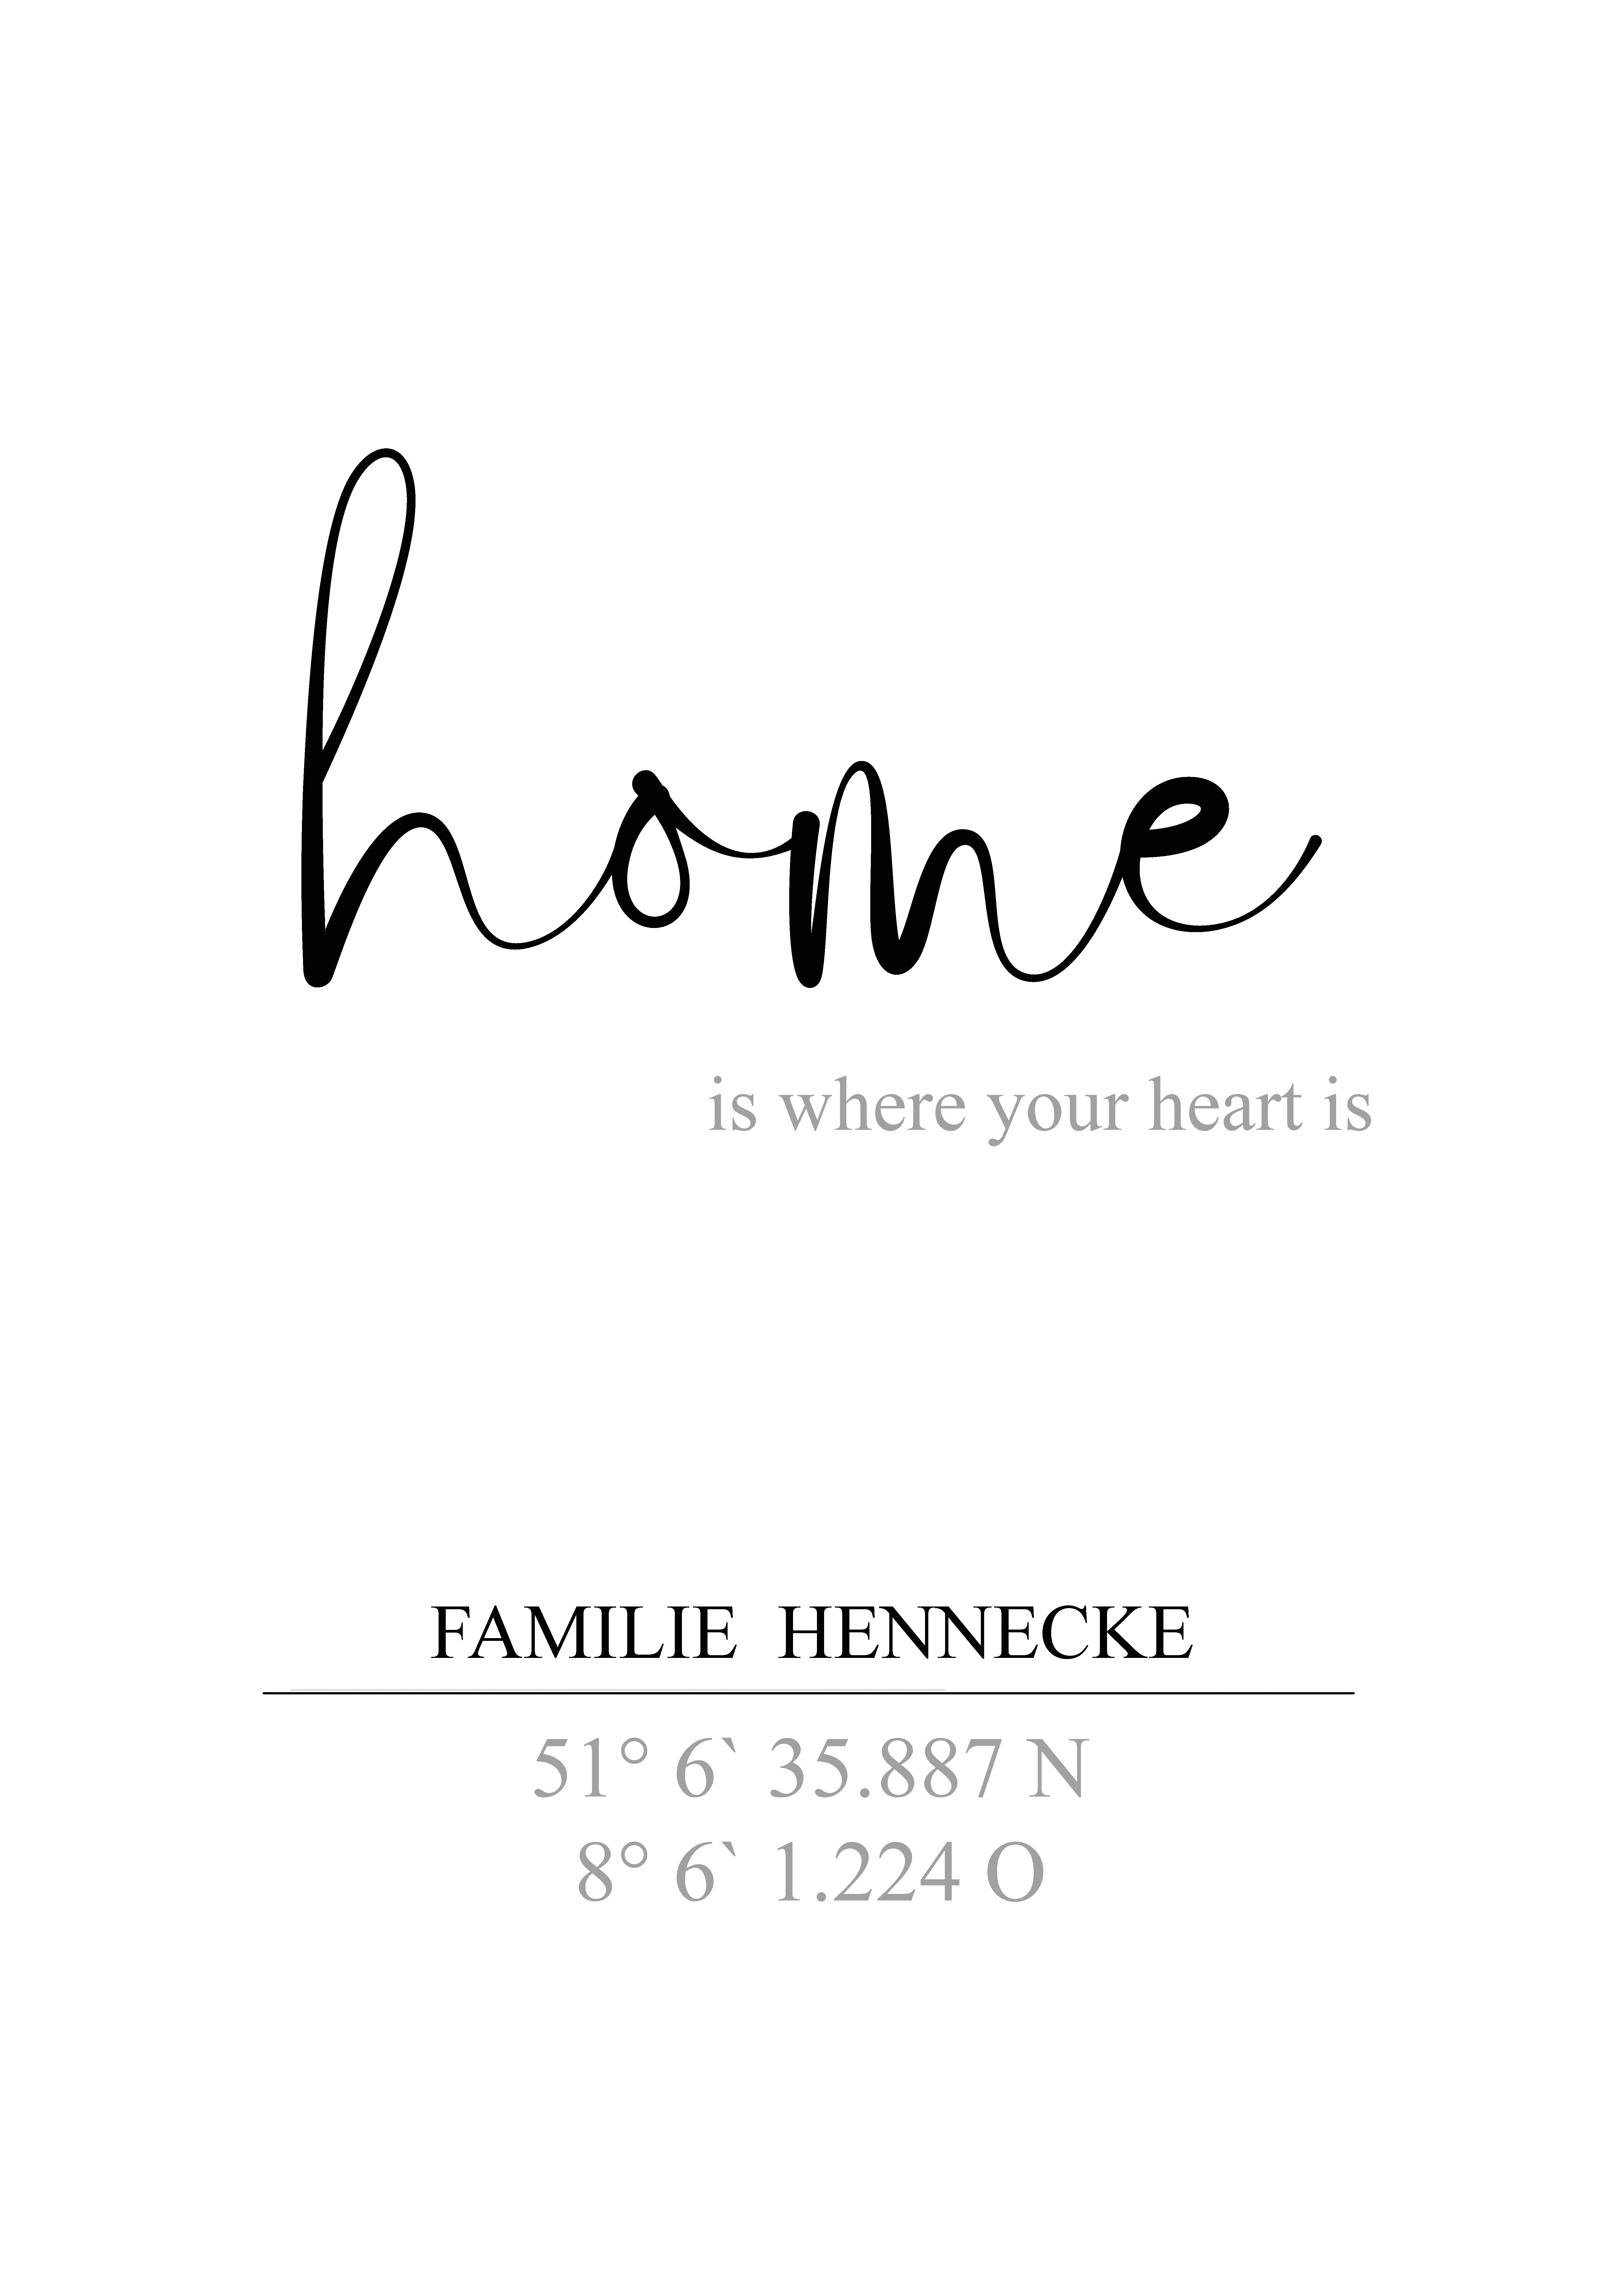 Personalisiertes Poster "Home"